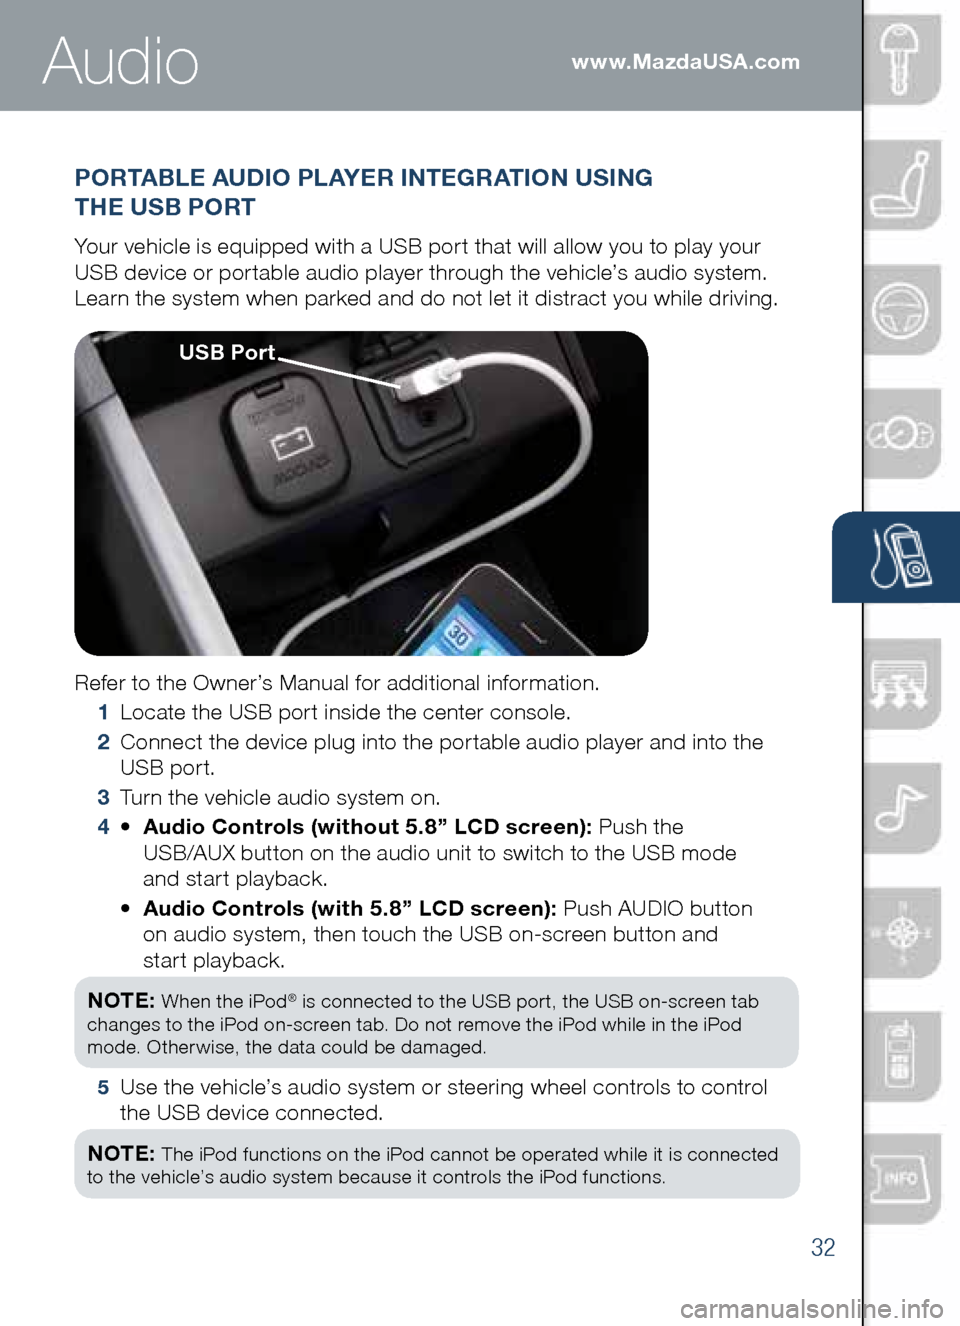 MAZDA MODEL CX-5 2014  Smart Start Guide (in English) 32
www.MazdaUSA.com
PORTAbLE AUDIO PLAYER INTEGRATION USING  
THE US b PORT
Your	vehicle	is	equipped	with	a	USB	port	that	will	allow	you	to	play	your 		
USB	device	or	portable	audio	player	through	the